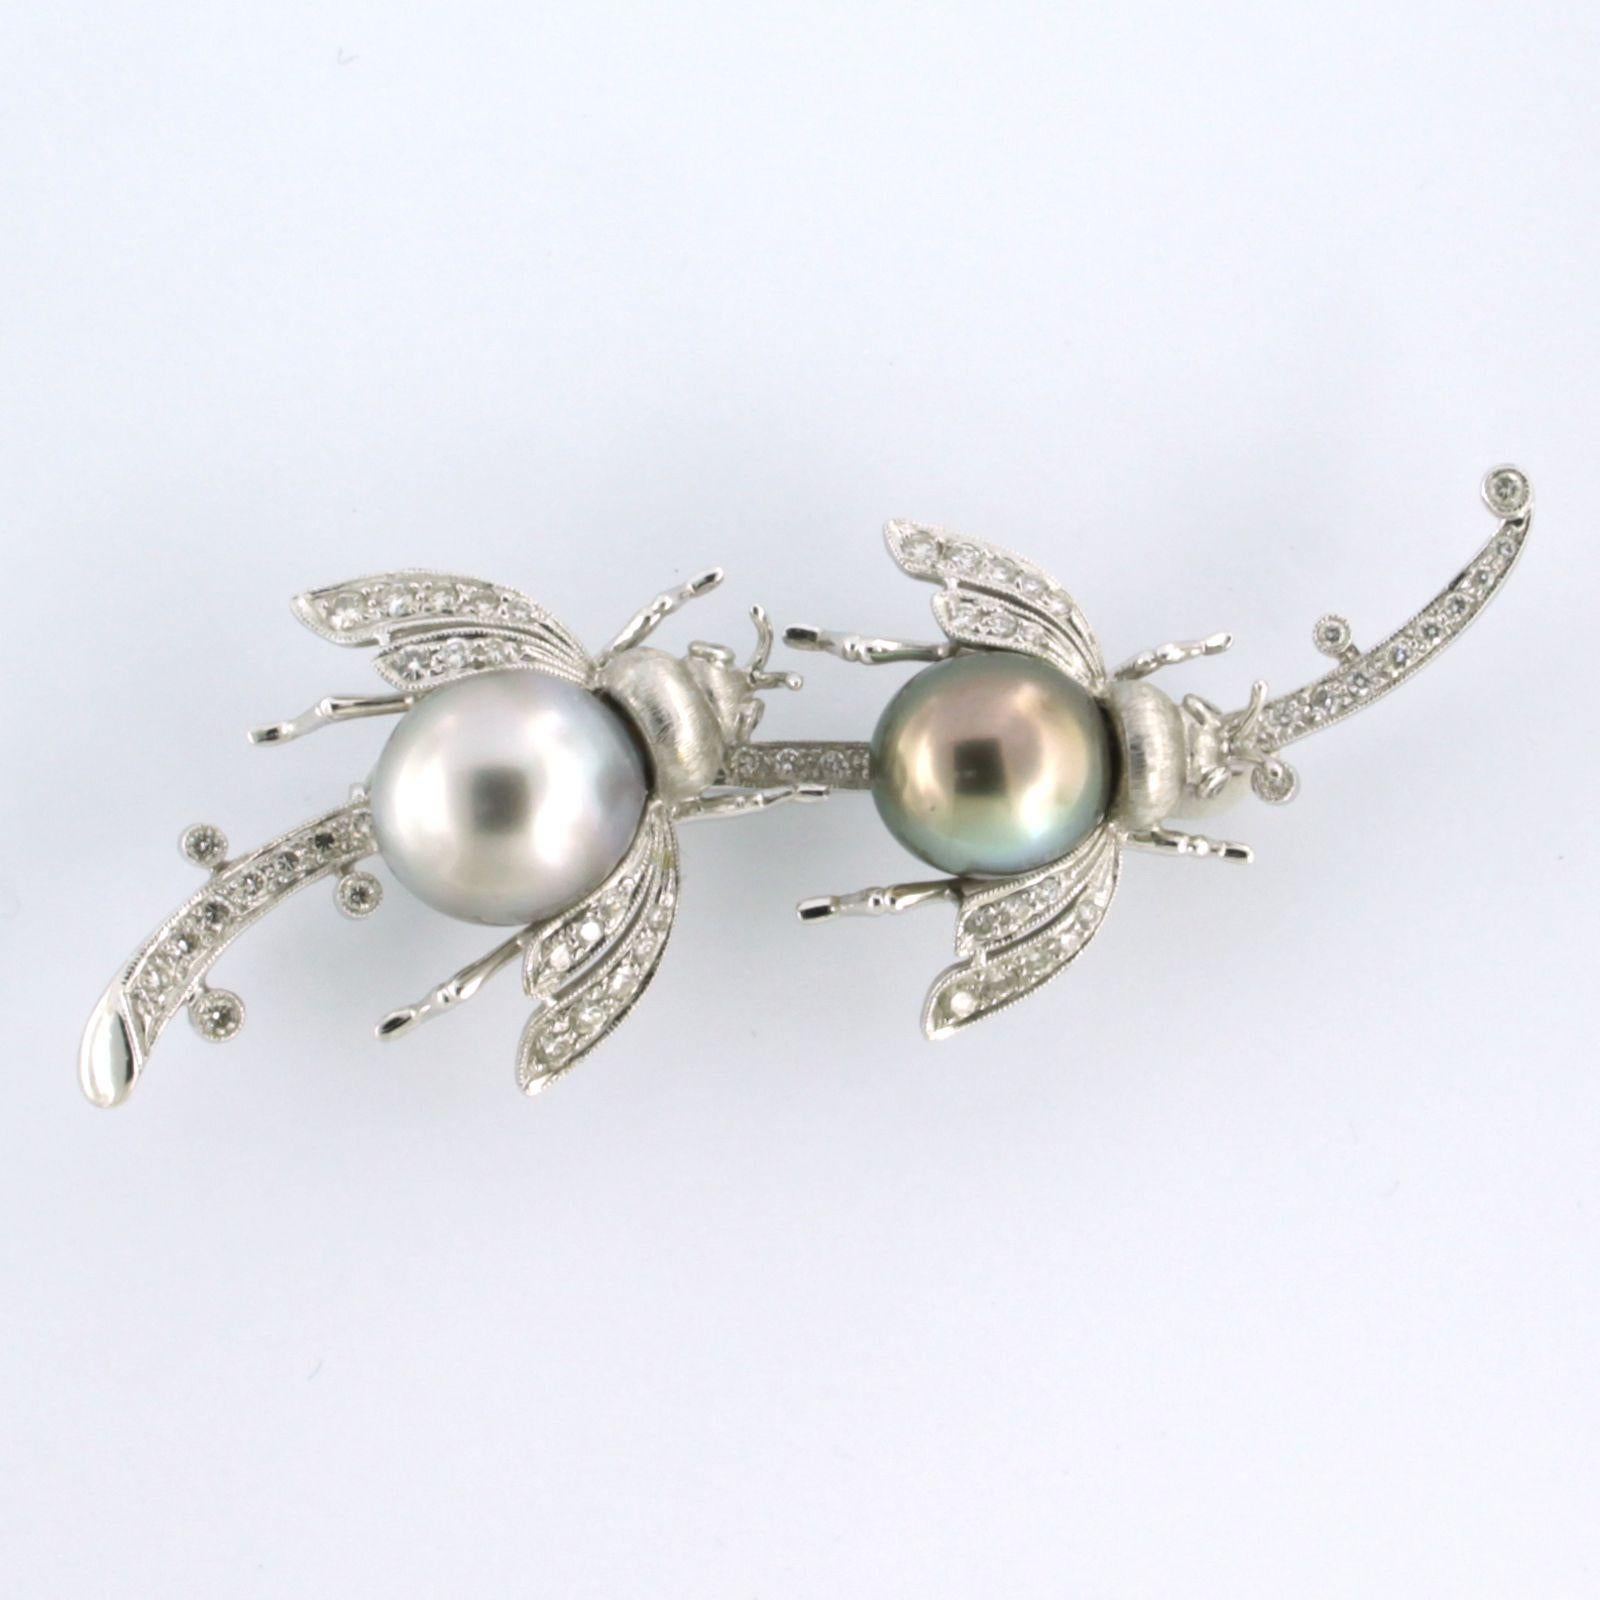 18k white gold brooch Two Bees on a twig, set with tahiti pearl and diamond total 0.60 carat – H/I – SI

Detailed description

the size of the brooch is 7.5 cm by 2.7 cm wide

weight 18.0 grams

put with

- 2 x 1.0 cm Tahiti pearls

color grey and